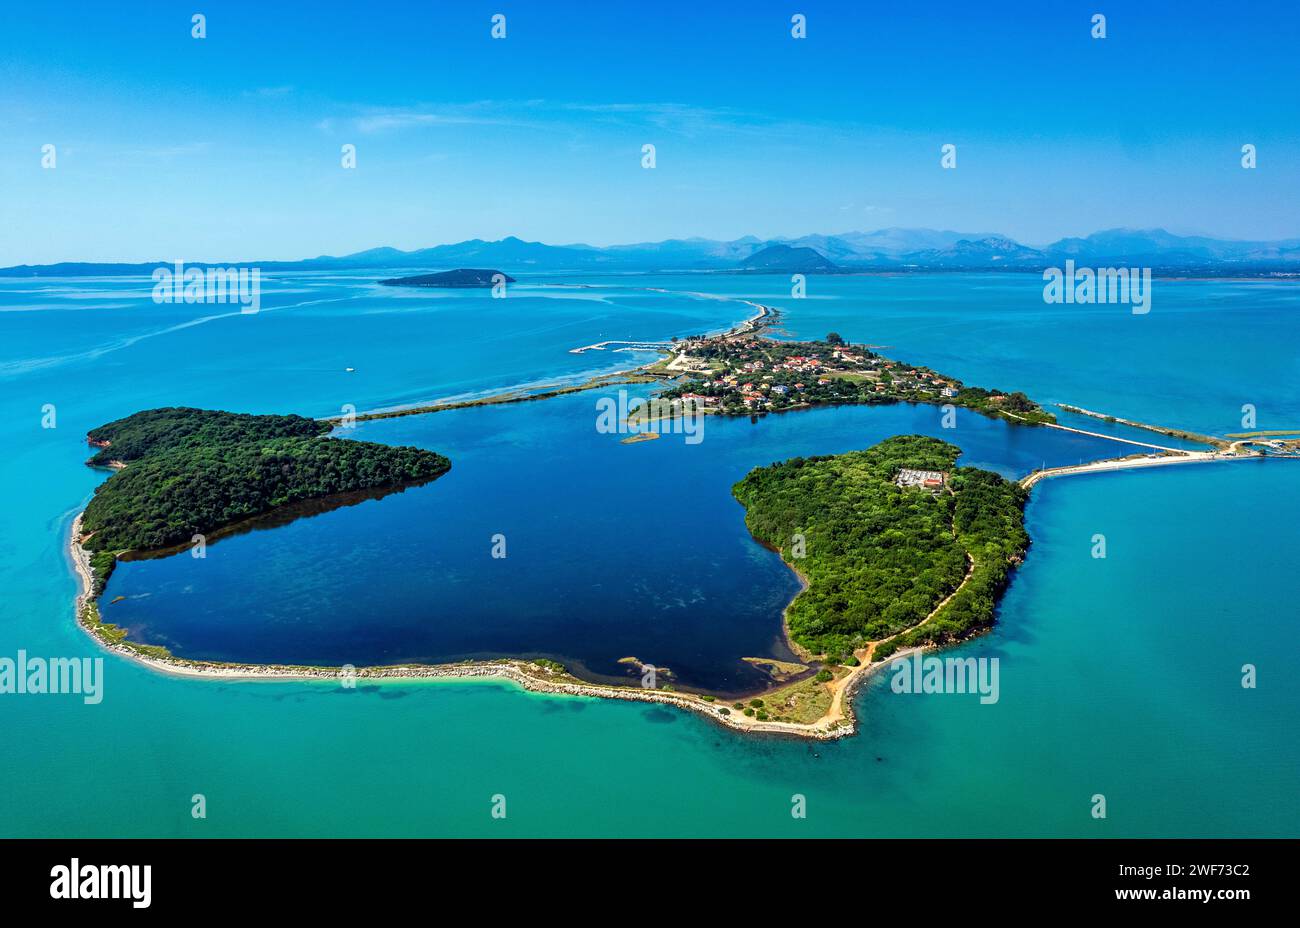 This is not some kind of atoll in the Indian or the Pacific Ocean. It is Koronissia island in the Ambracian ('Amvrakikos') gulf, Arta, Epirus, Greece. Stock Photo